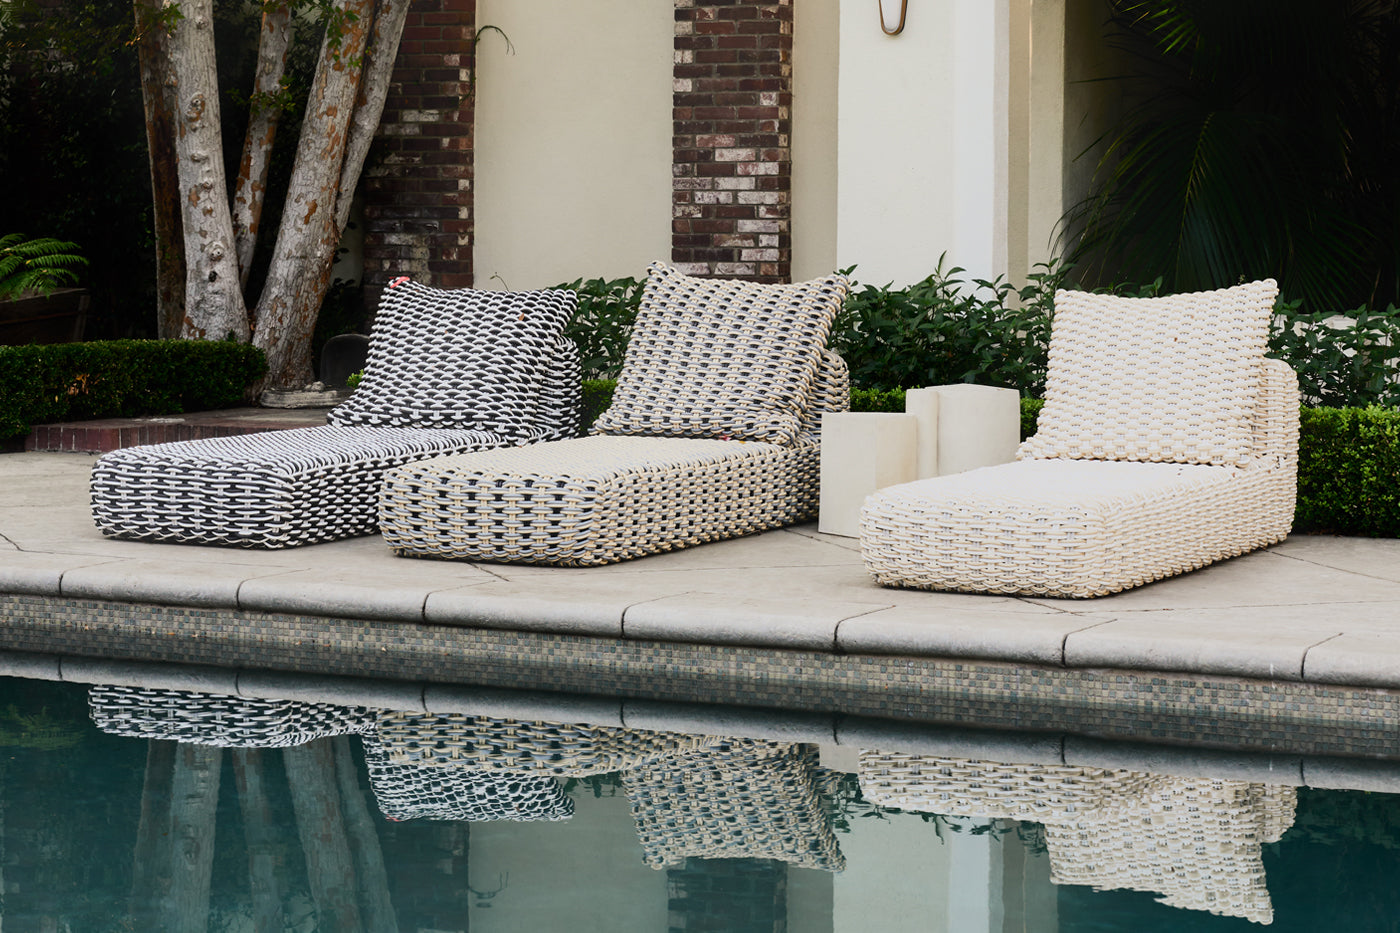 Custom Chaise Lounges, Casa Perfect, Los Angeles, CA, 2022